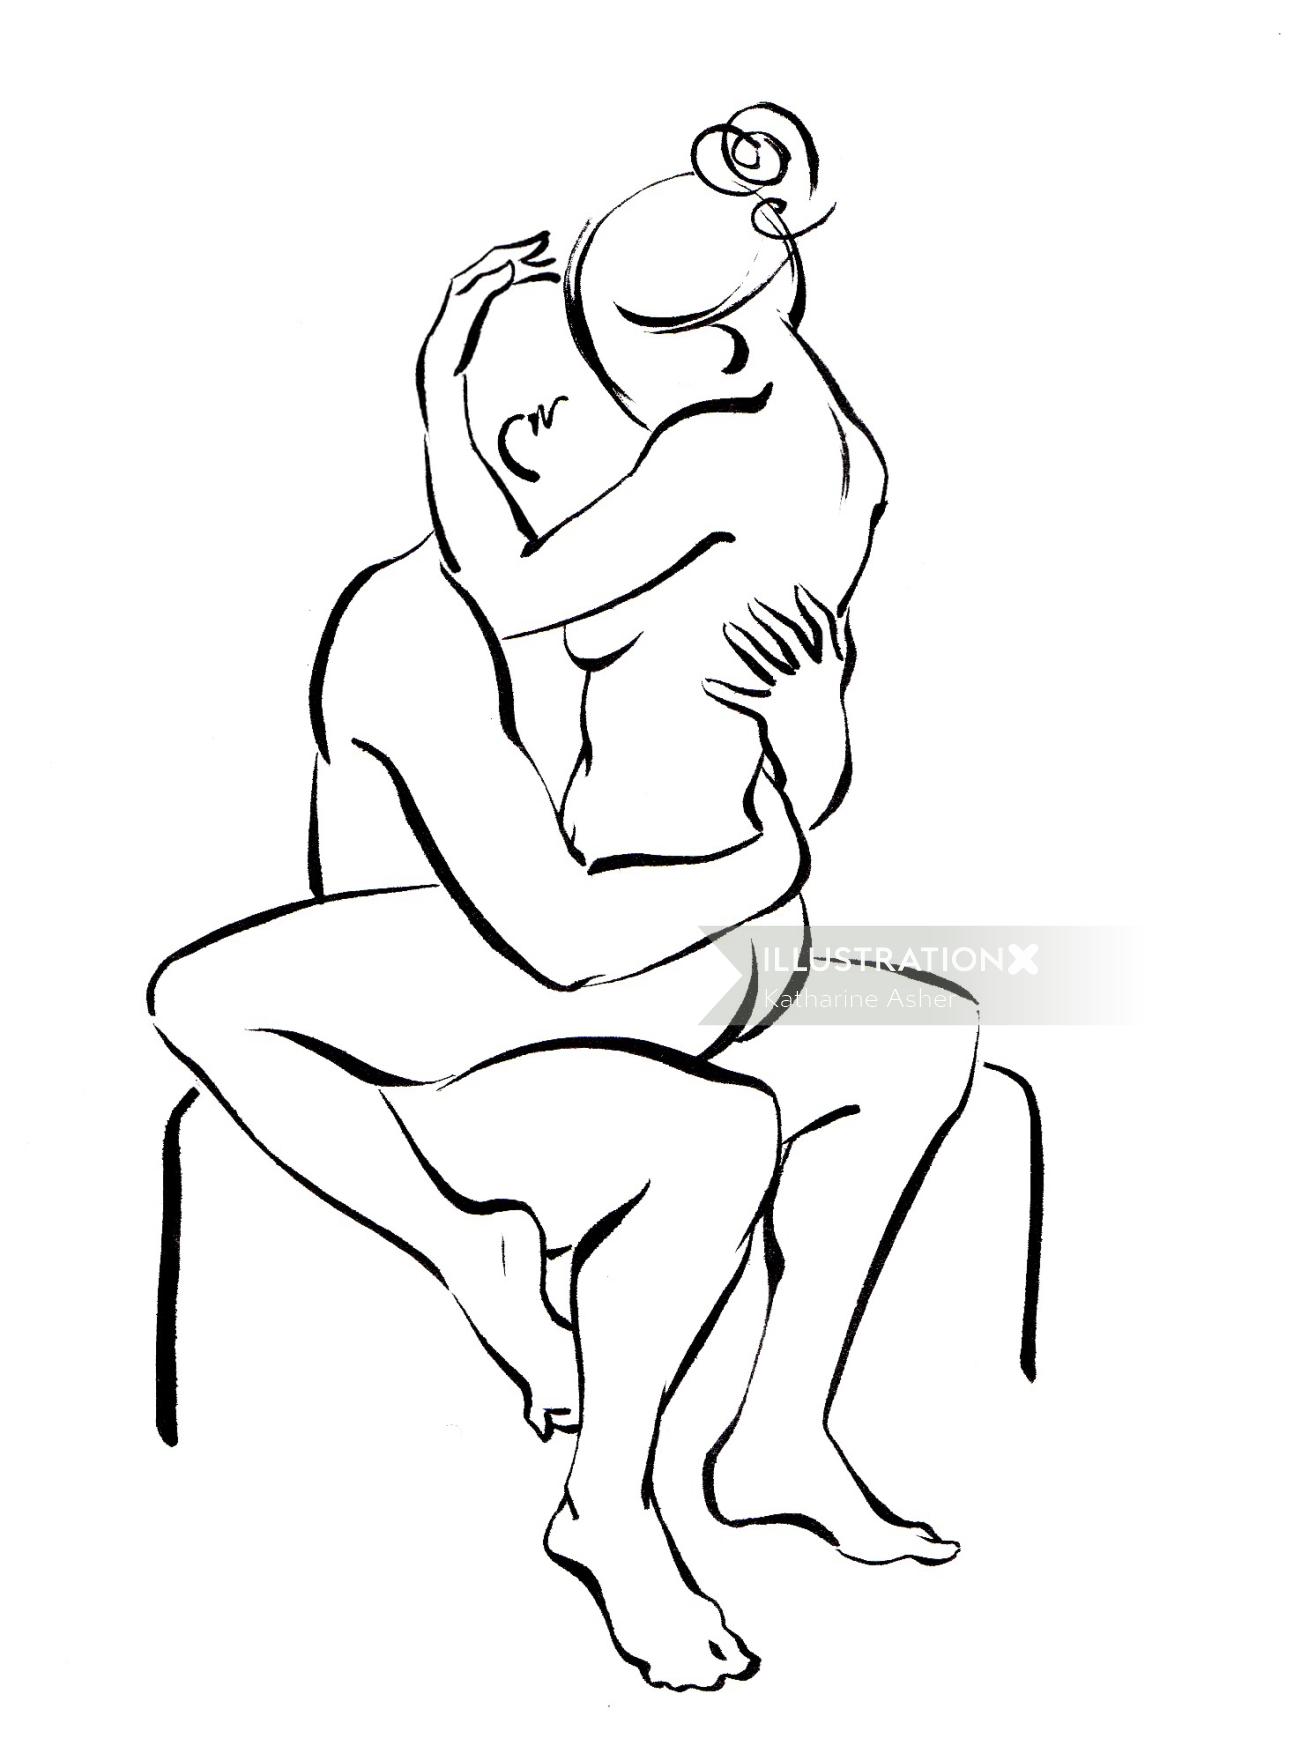 An illustration of classic sex positions